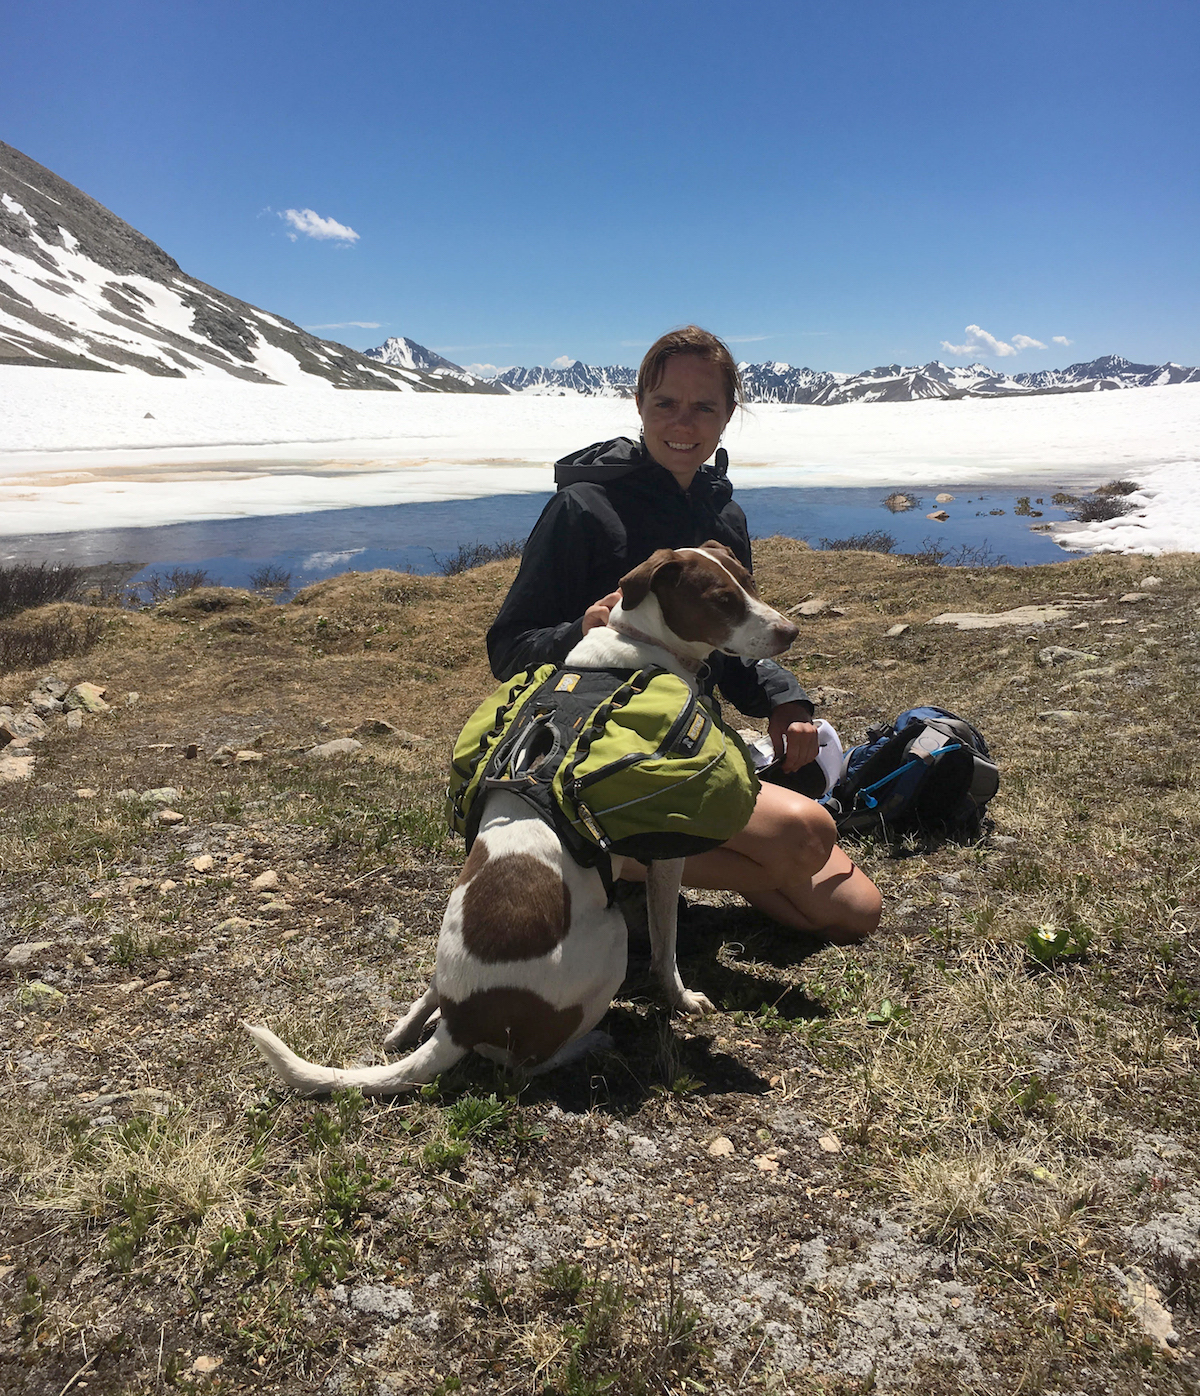 Mandi Franz explores the high country with Soleil the dog during an overnight trip on Independence Pass, Colorado. [Photo] Derek Franz